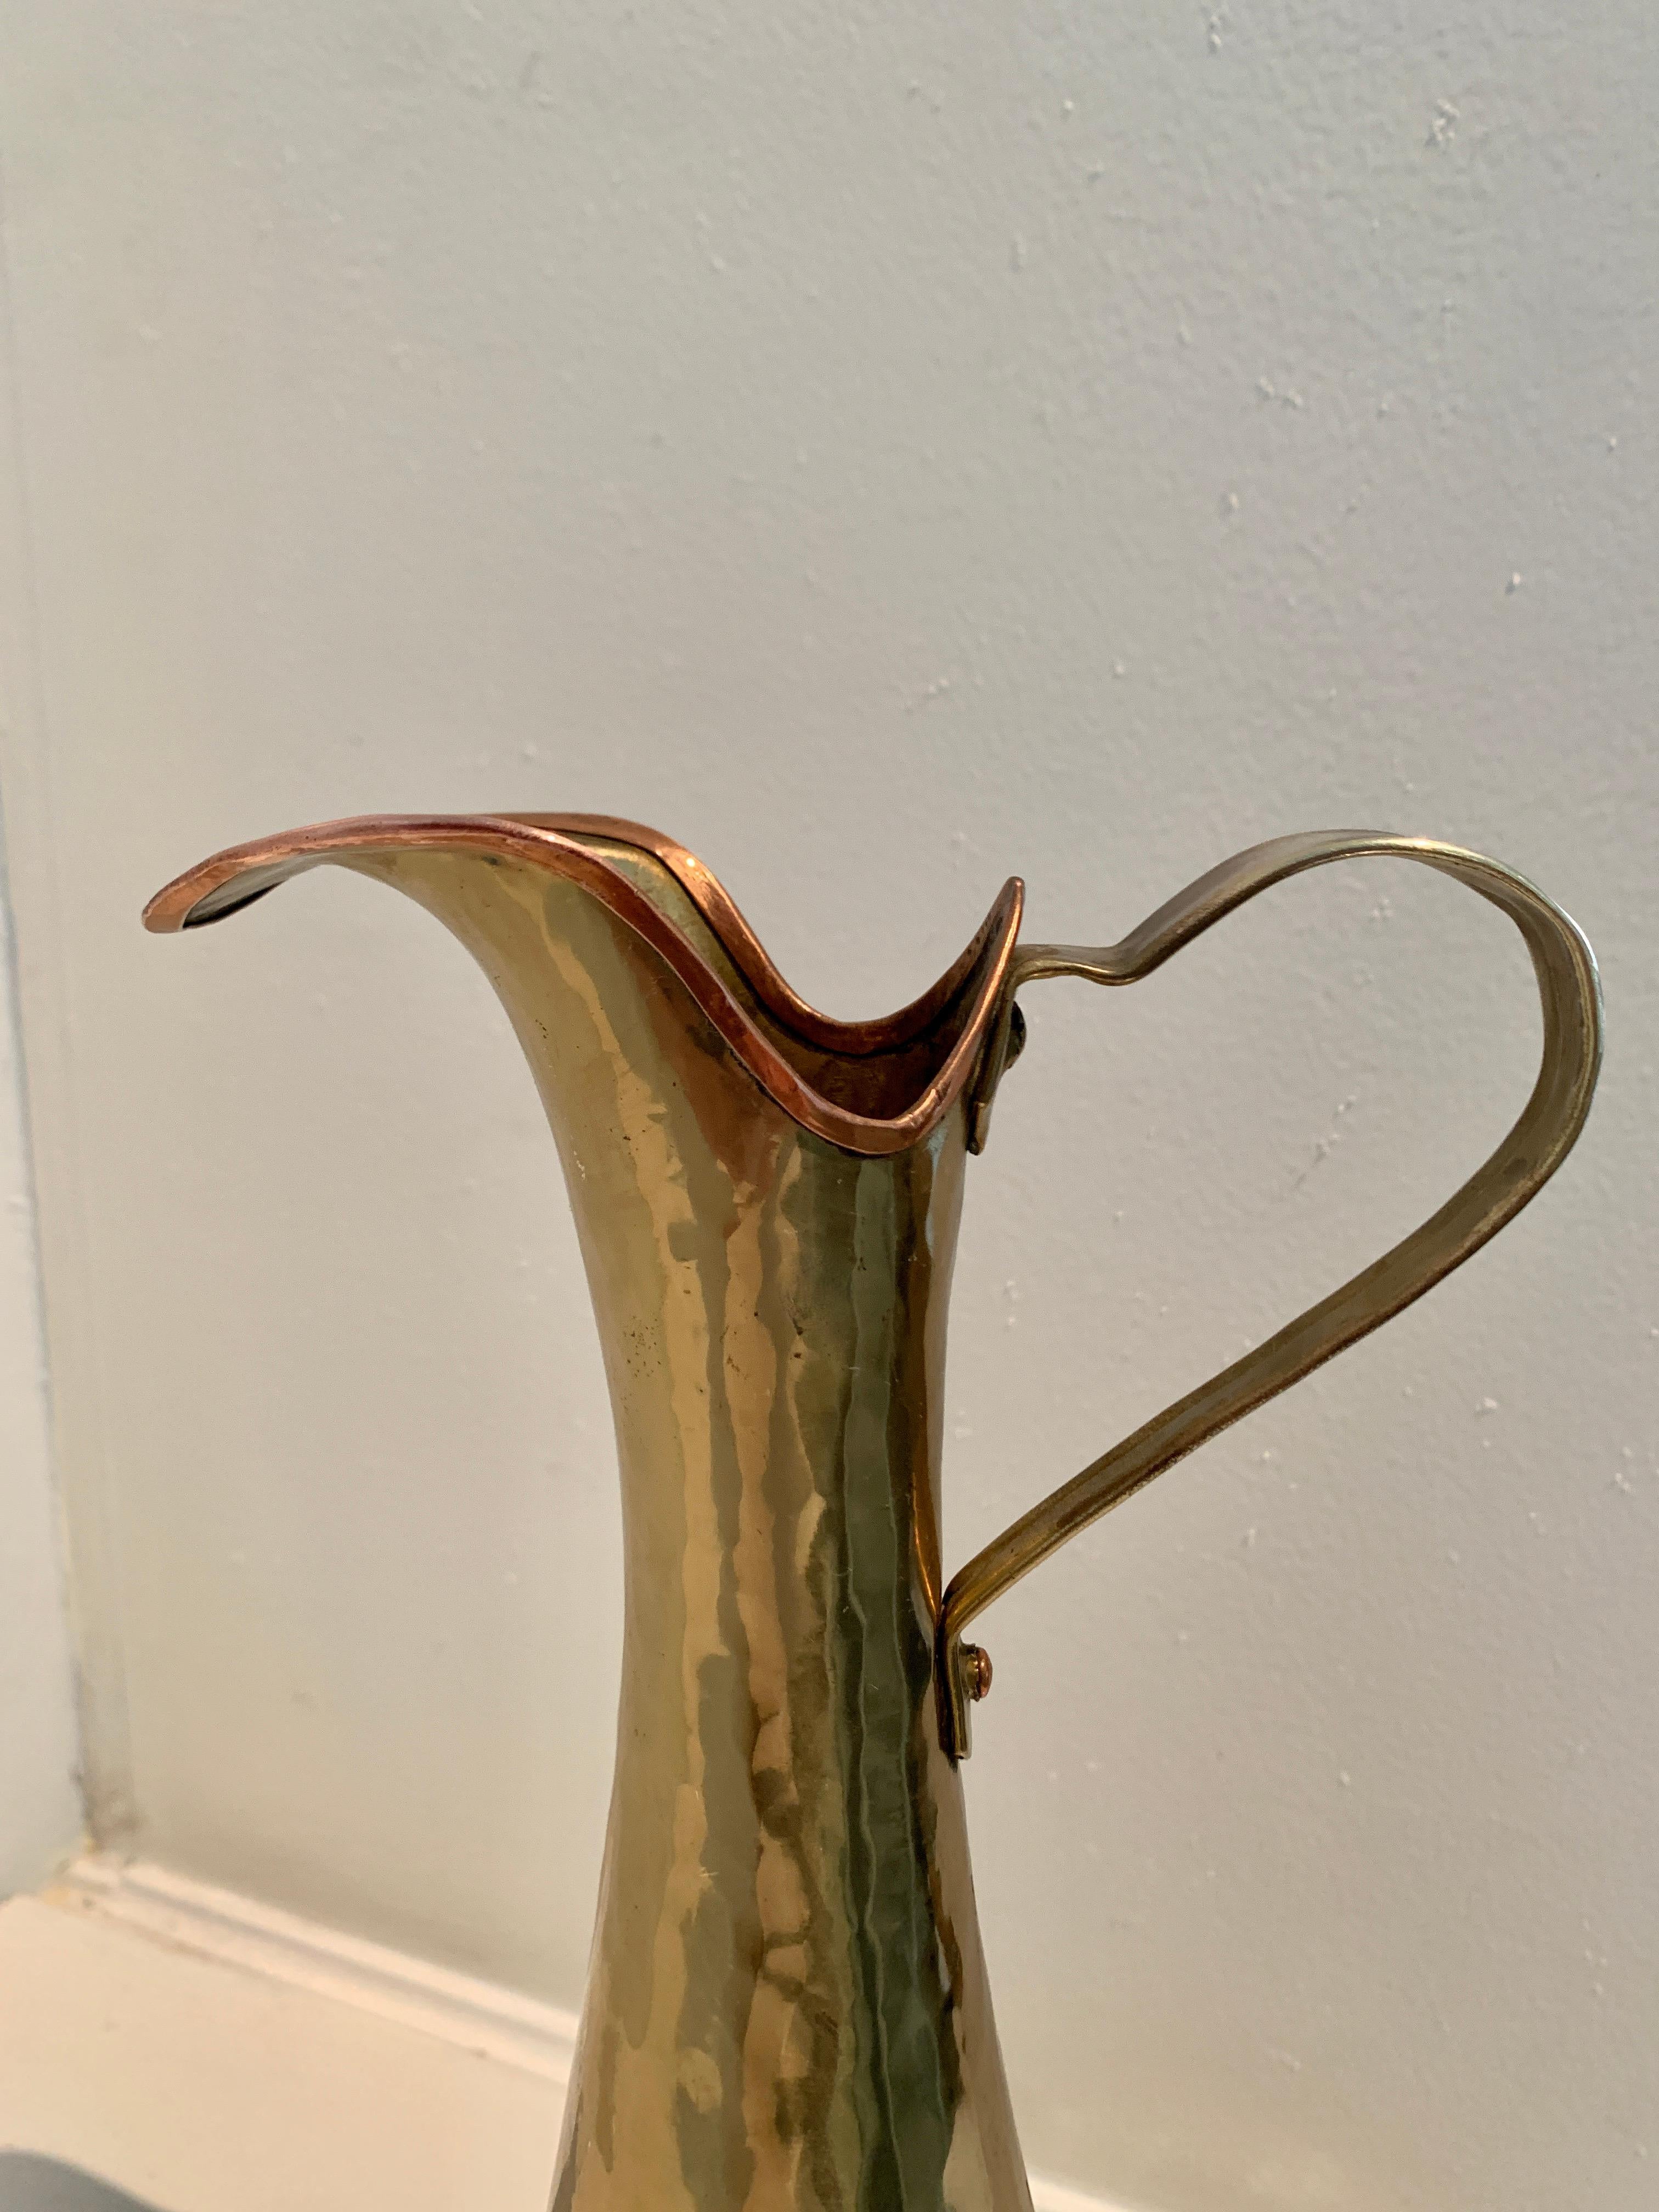 A wonderful pitcher of hammered brass with a copper lip and fittings. The piece is a compliment to any shelf, work station or garden area. Water your plants or serve delicacies, from tea to oil! a lovely shape and sophisticated design that easily